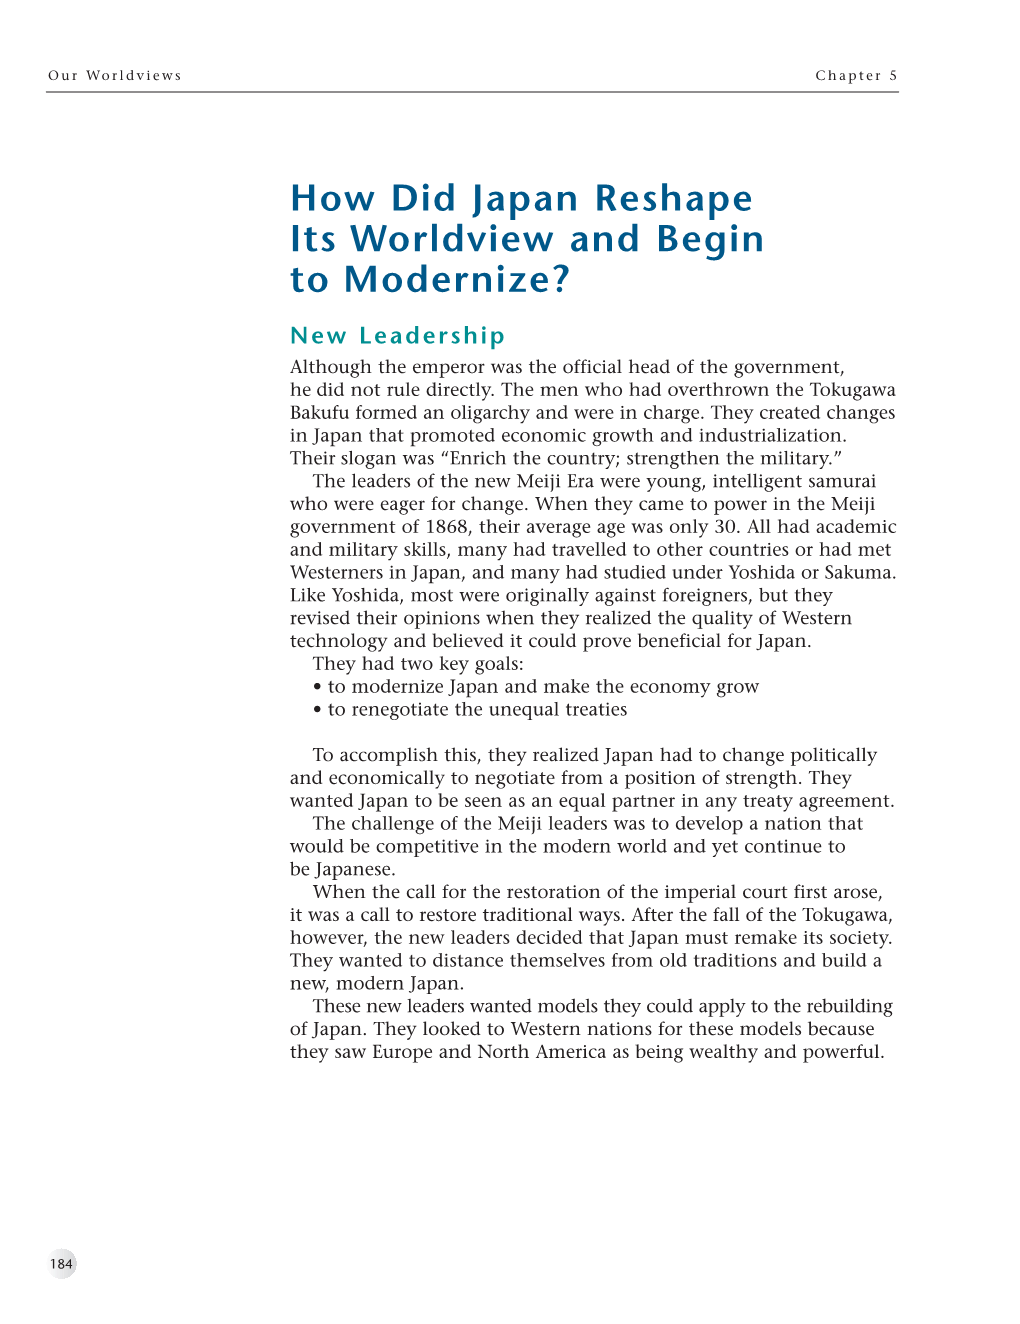 How Did Japan Reshape Its Worldview and Begin to Modernize?